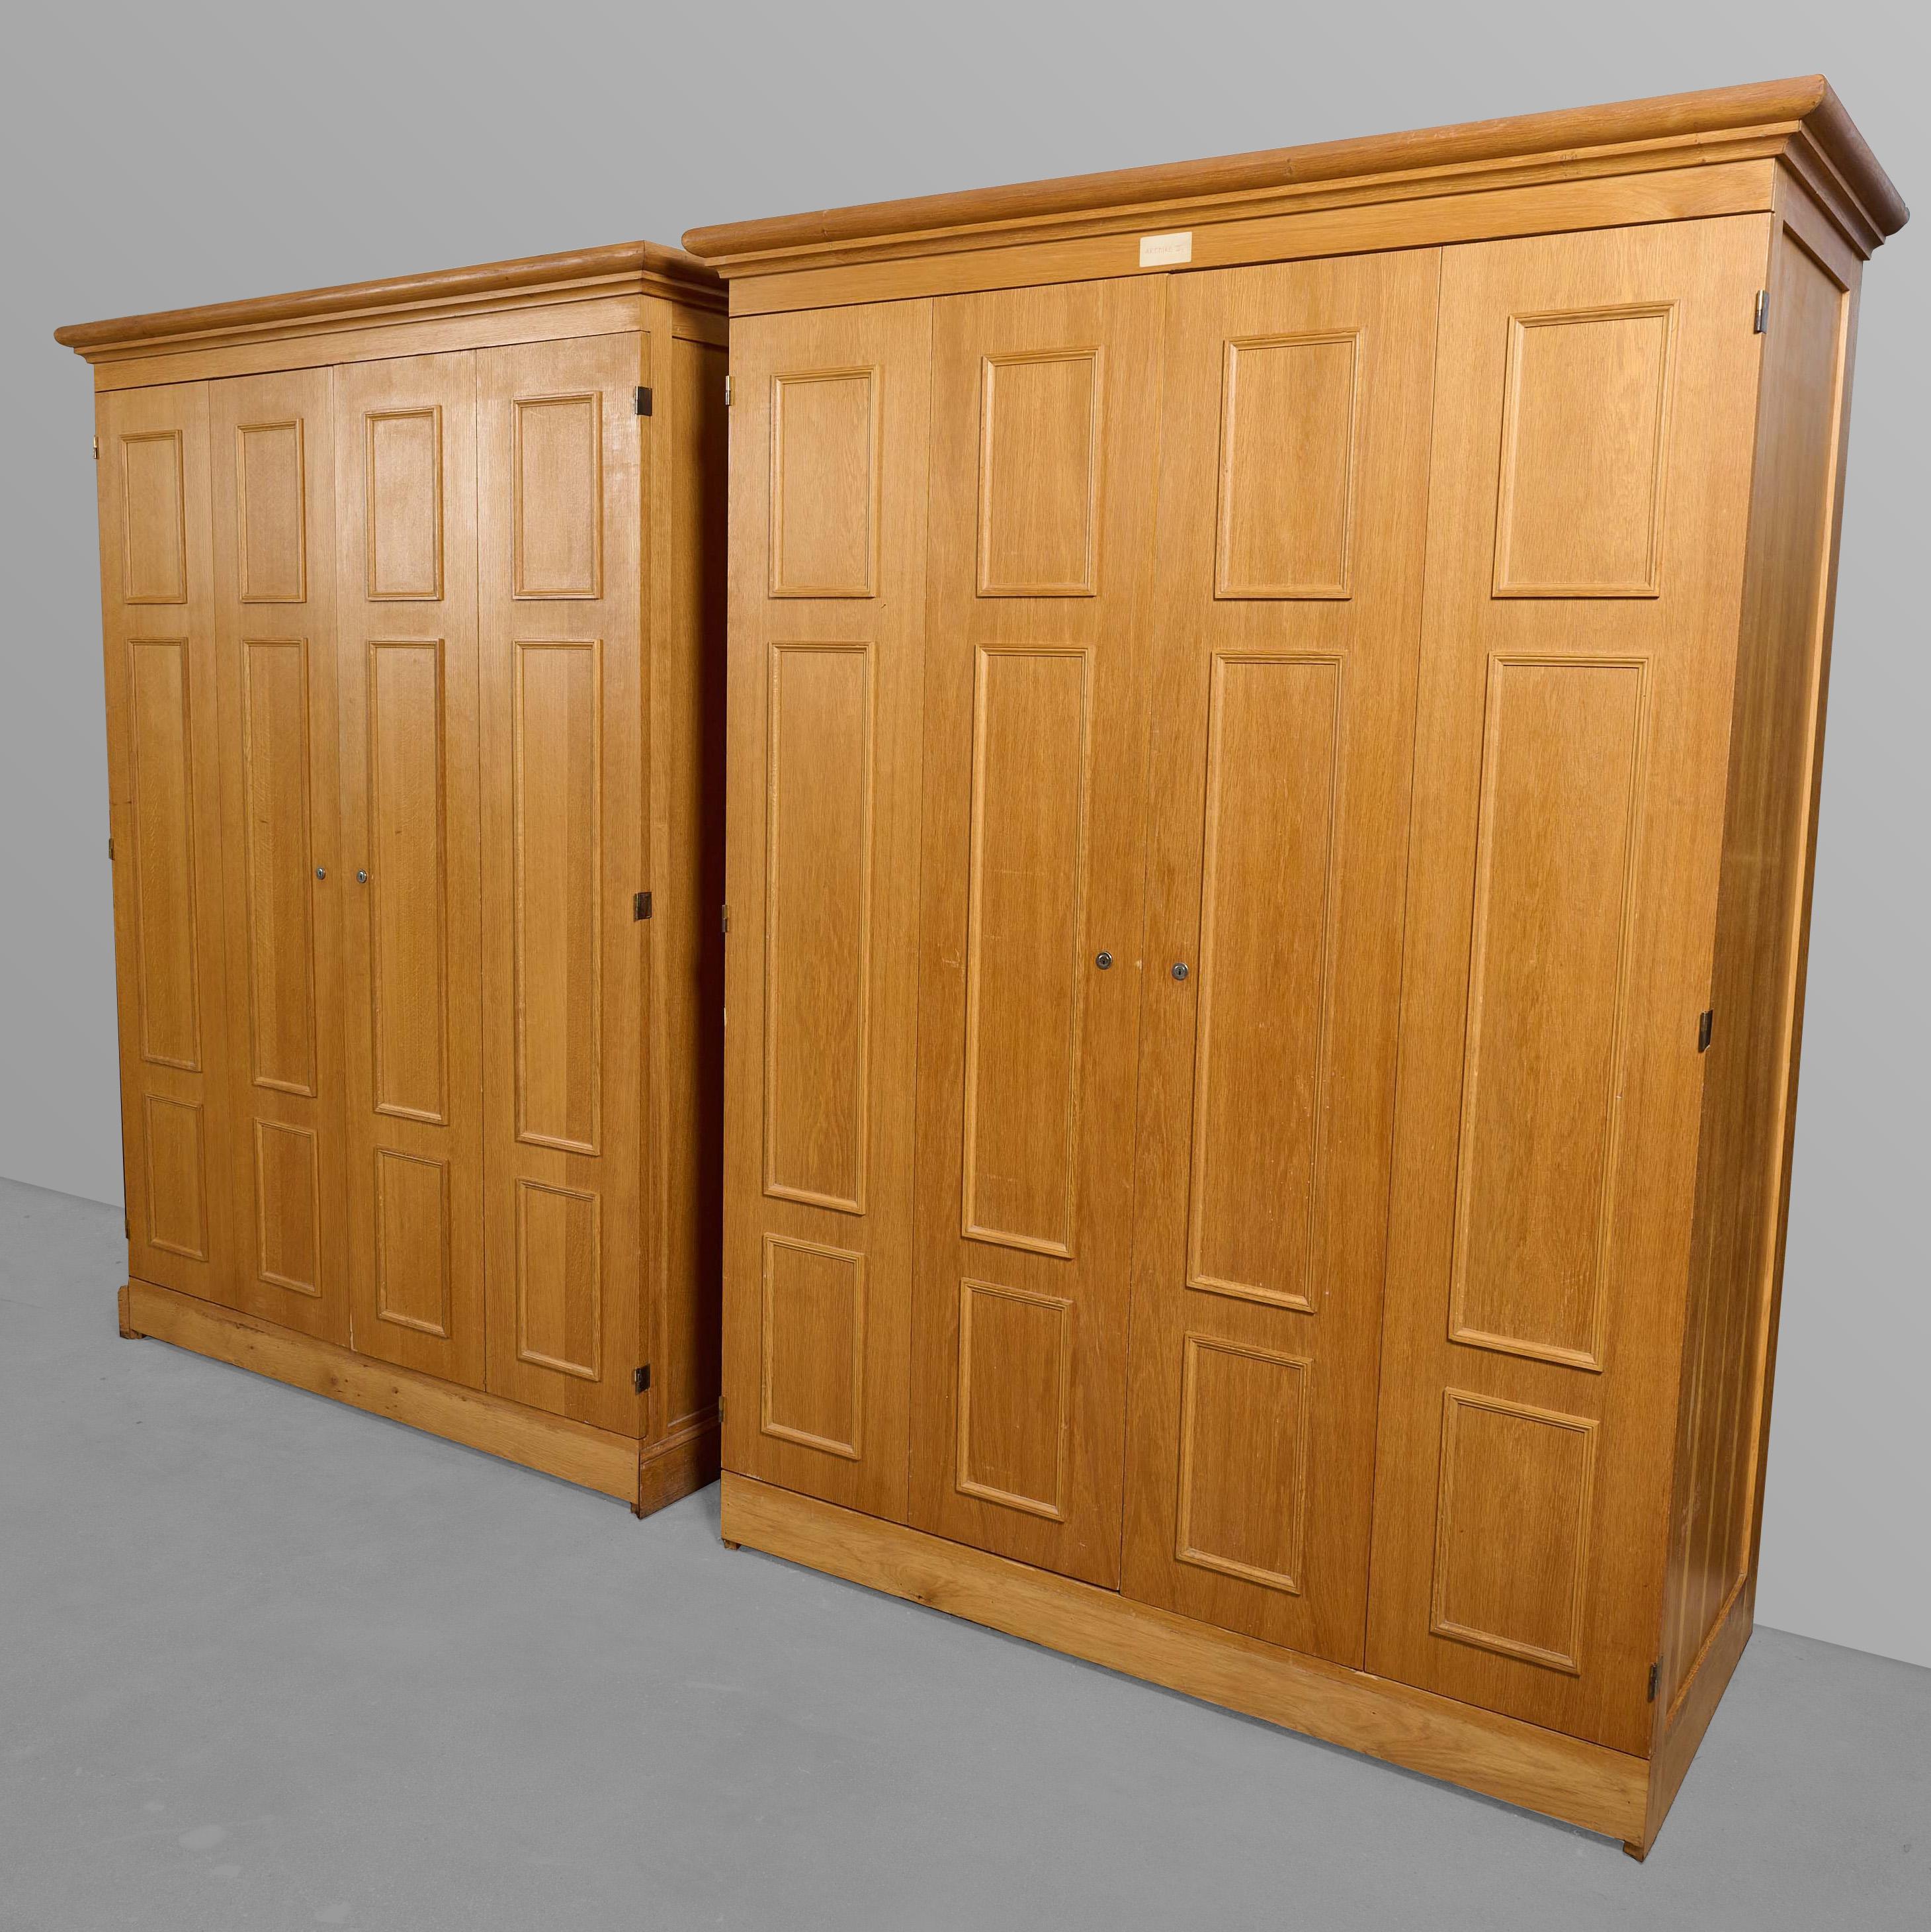 Two door oak cabinet with multi door interior. From the Bank of France. Two available, priced per single unit.

